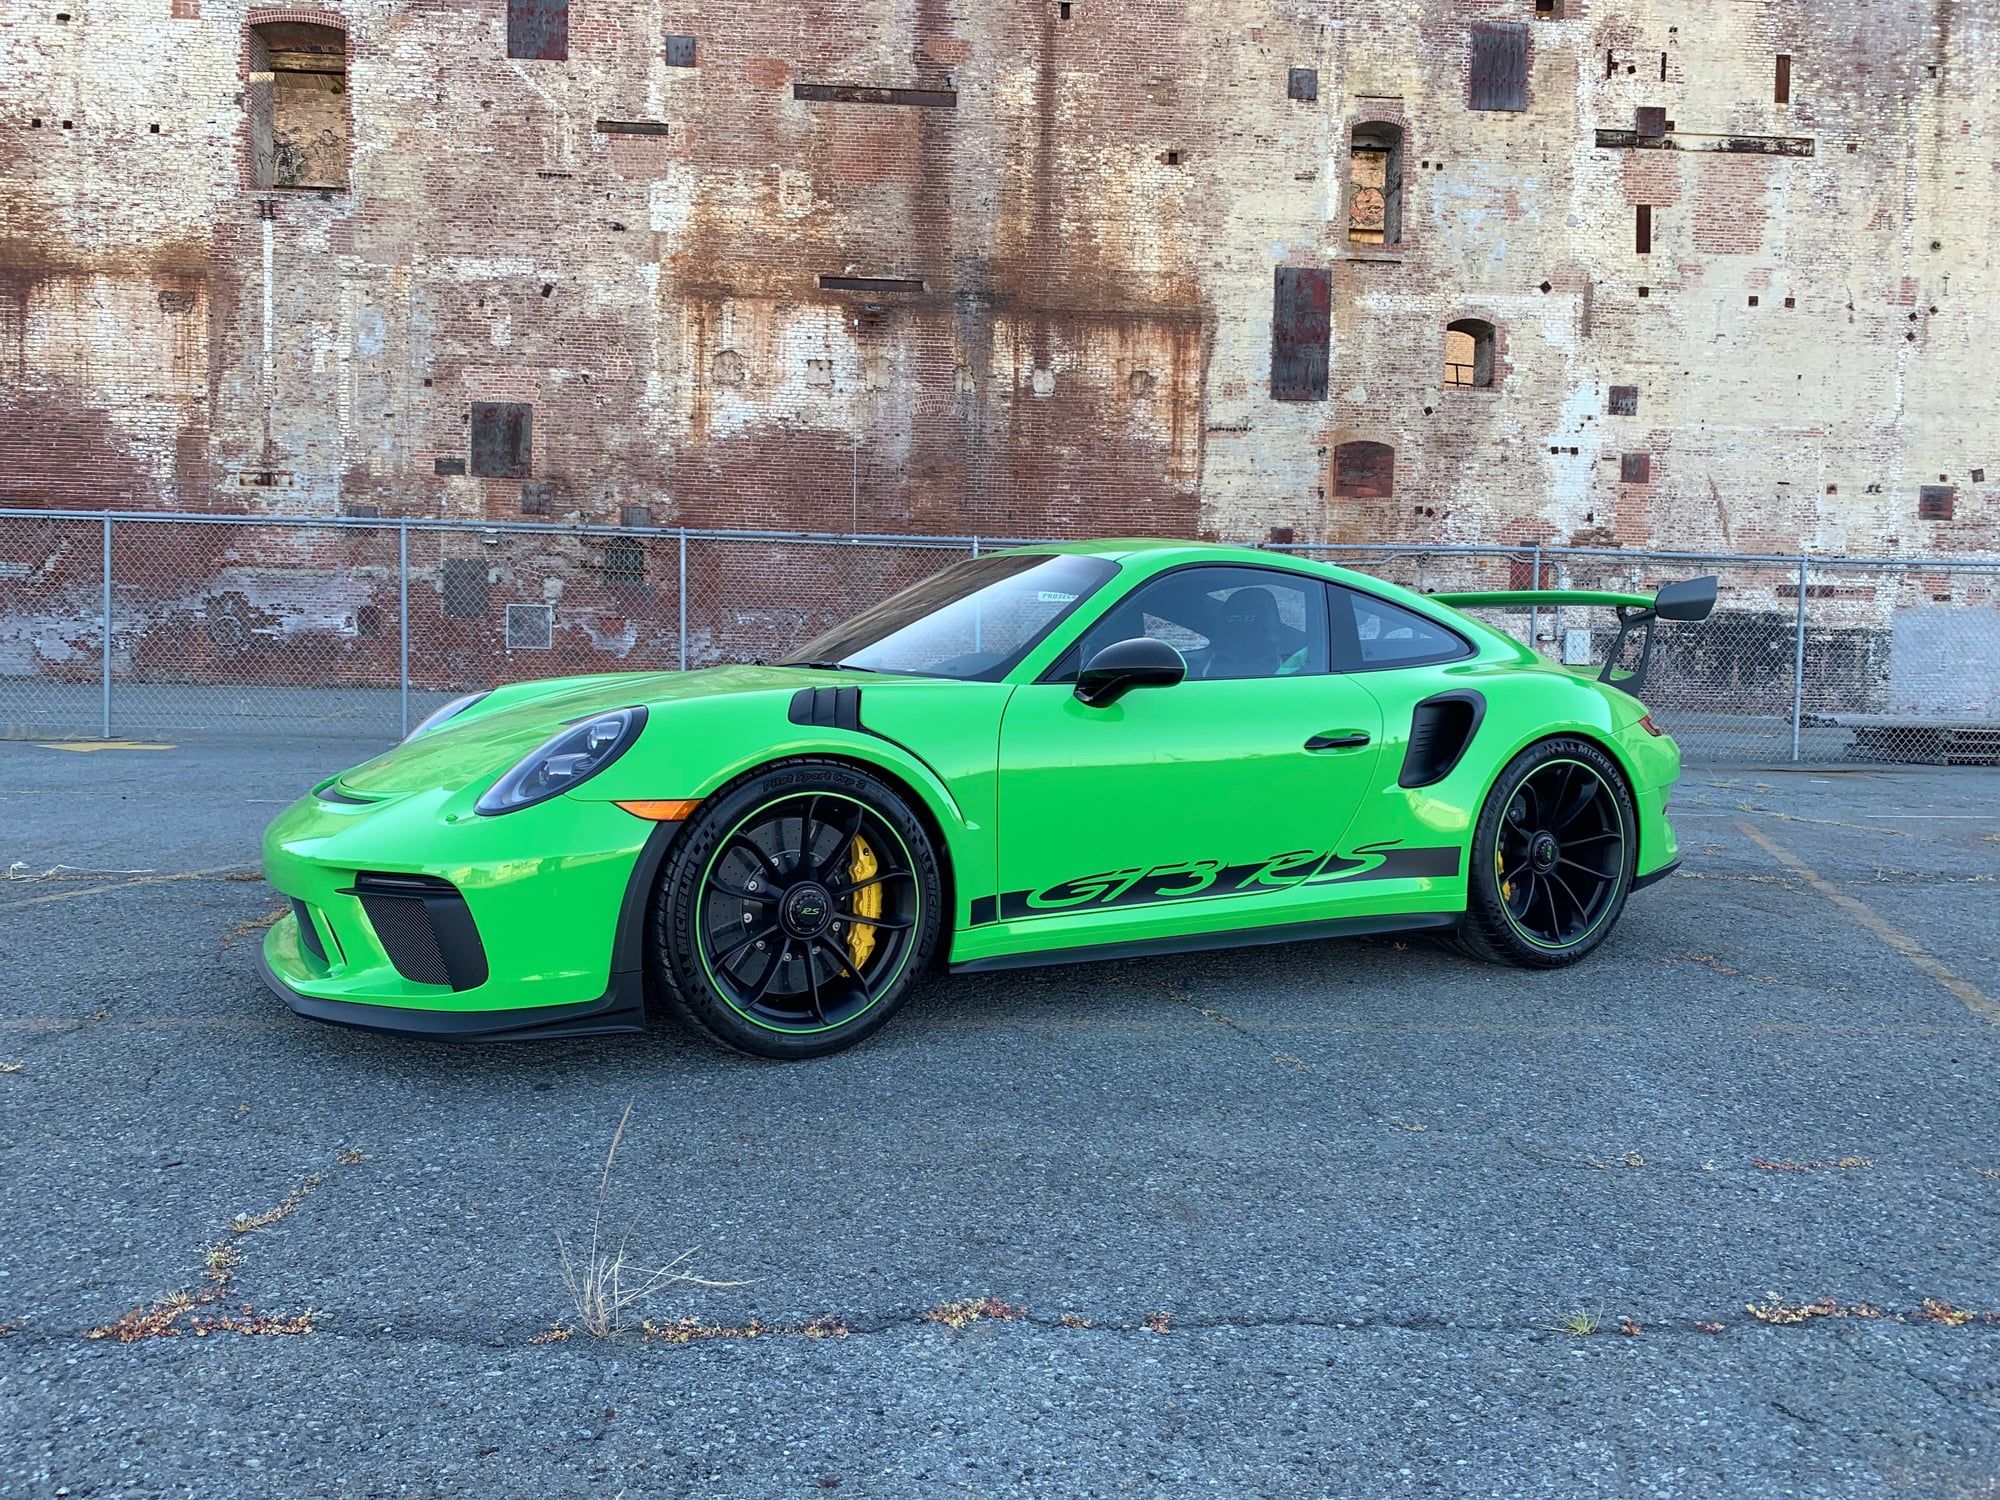 2019 Porsche GT3 - 2019 Lizard Green GT3RS at MSRP 229k - New - VIN wp0af2a93ks1650xx - 14 Miles - 6 cyl - 2WD - Automatic - Coupe - Other - Sf Bay Area, CA 94111, United States